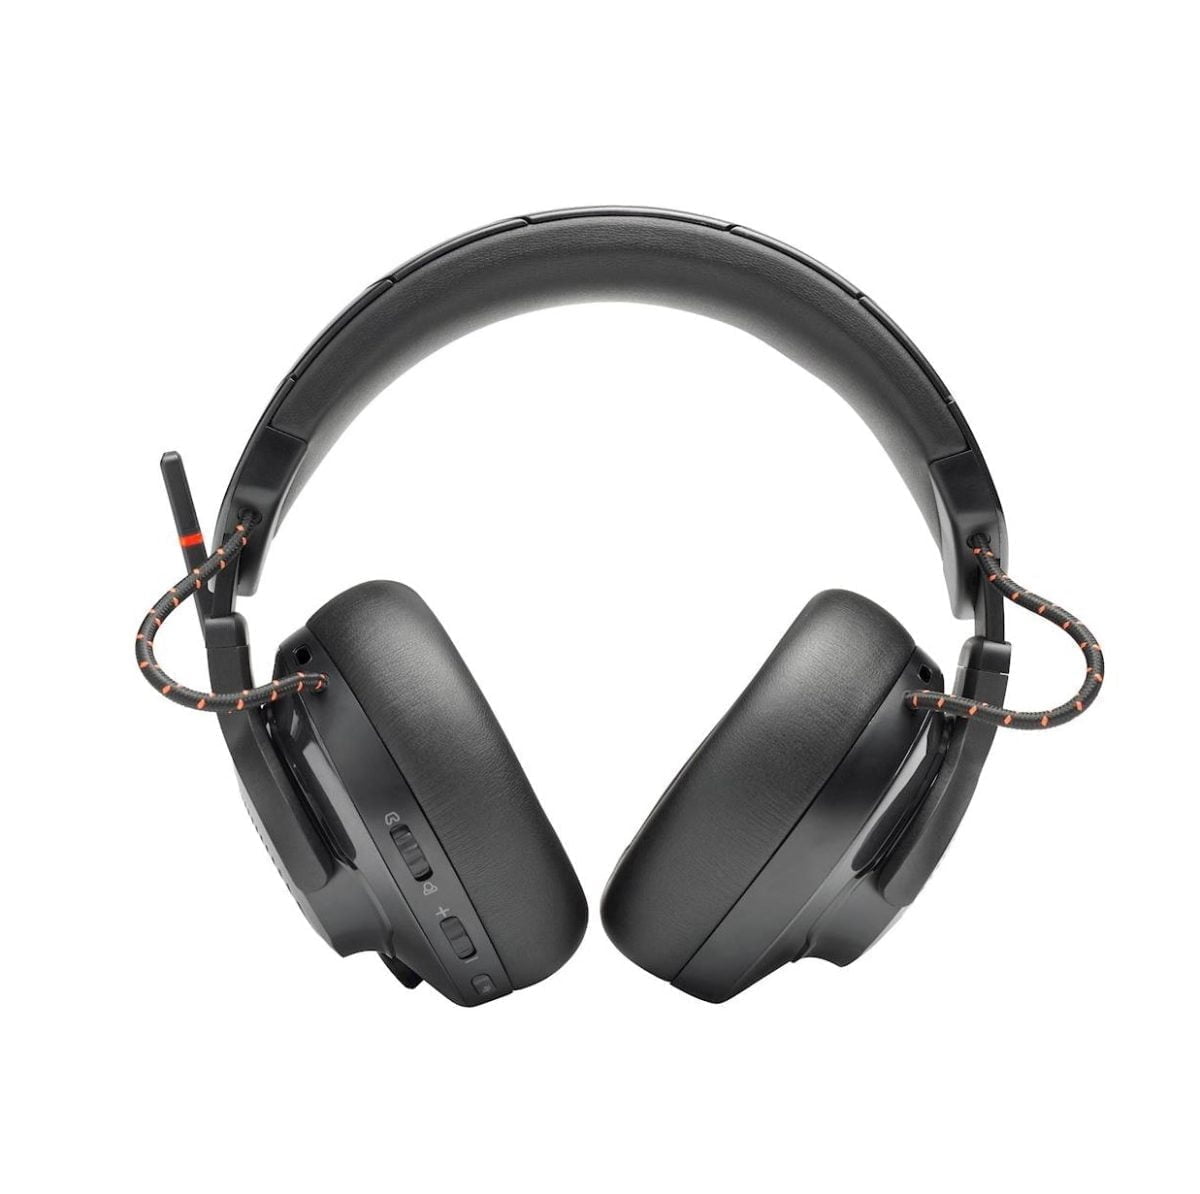 6408577Cv11D Jbl &Lt;H1&Gt;Jbl Quantum 200 Wired Over-Ear Gaming Headset With Flip-Up Mic&Lt;/H1&Gt; Https://Www.youtube.com/Watch?V=E3Fiycdl7De Turn Your Game Into An Epic Event. Featuring Jbl Quantumsound Signature, The Jbl Quantum 200 Headset Puts You Right In The Middle Of The Action. Immersive And Accurate, So That You Can Hear Even The Tiniest Details, The Jbl Quantum 200 Equips You With All You Need To Own Every Battle. Jbl Quantum Jbl Quantum 200 Wired Over-Ear Gaming Headset With Flip-Up Mic